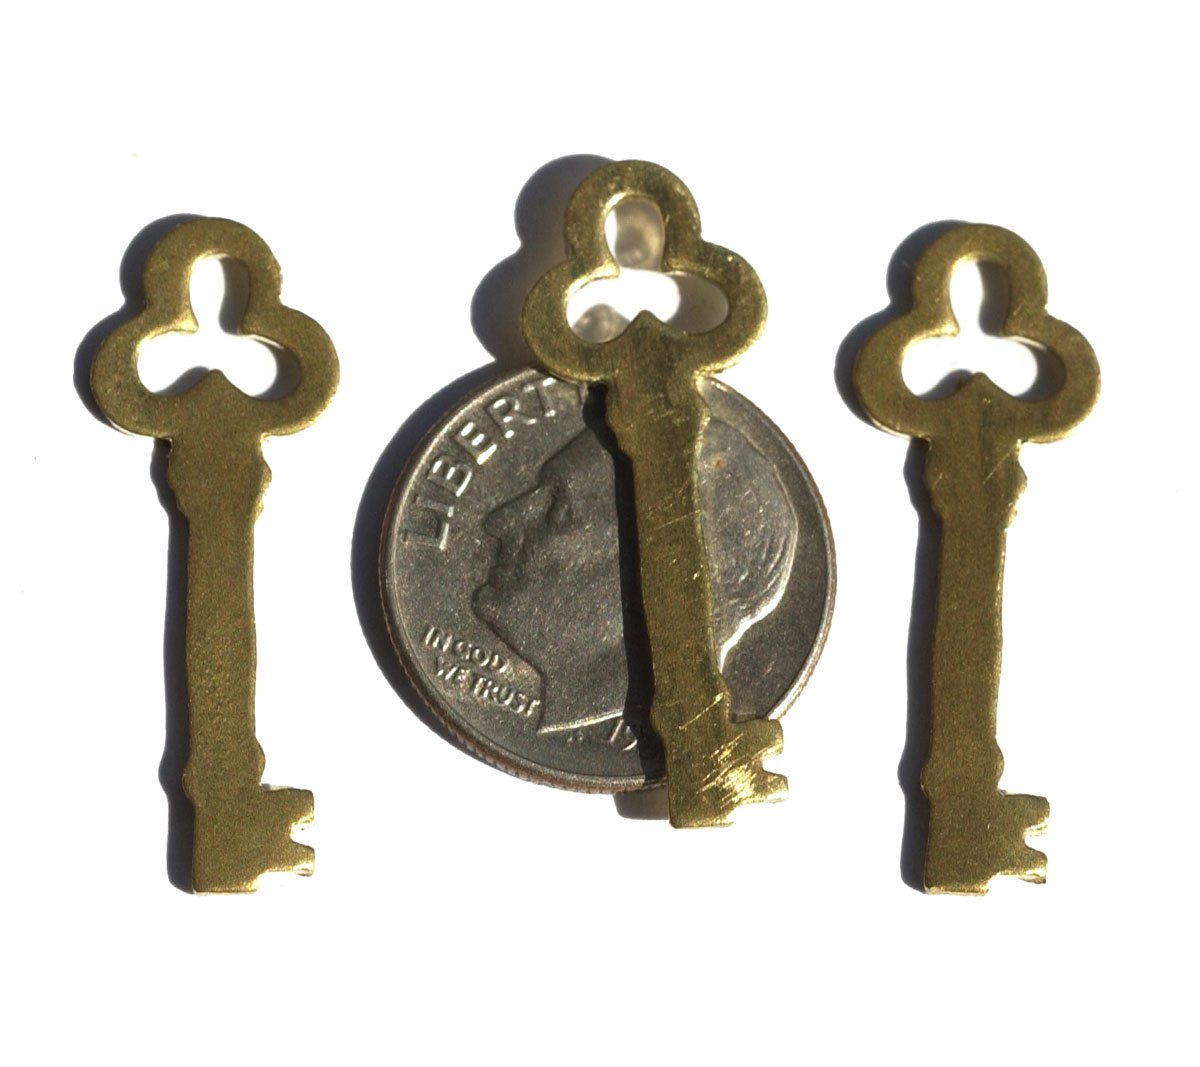 Brass Blank Key Cross my Heart Mini 27mm x 10mm 20g Cutout for Blanks Metalworking Stamping Texturing - 8 pieces